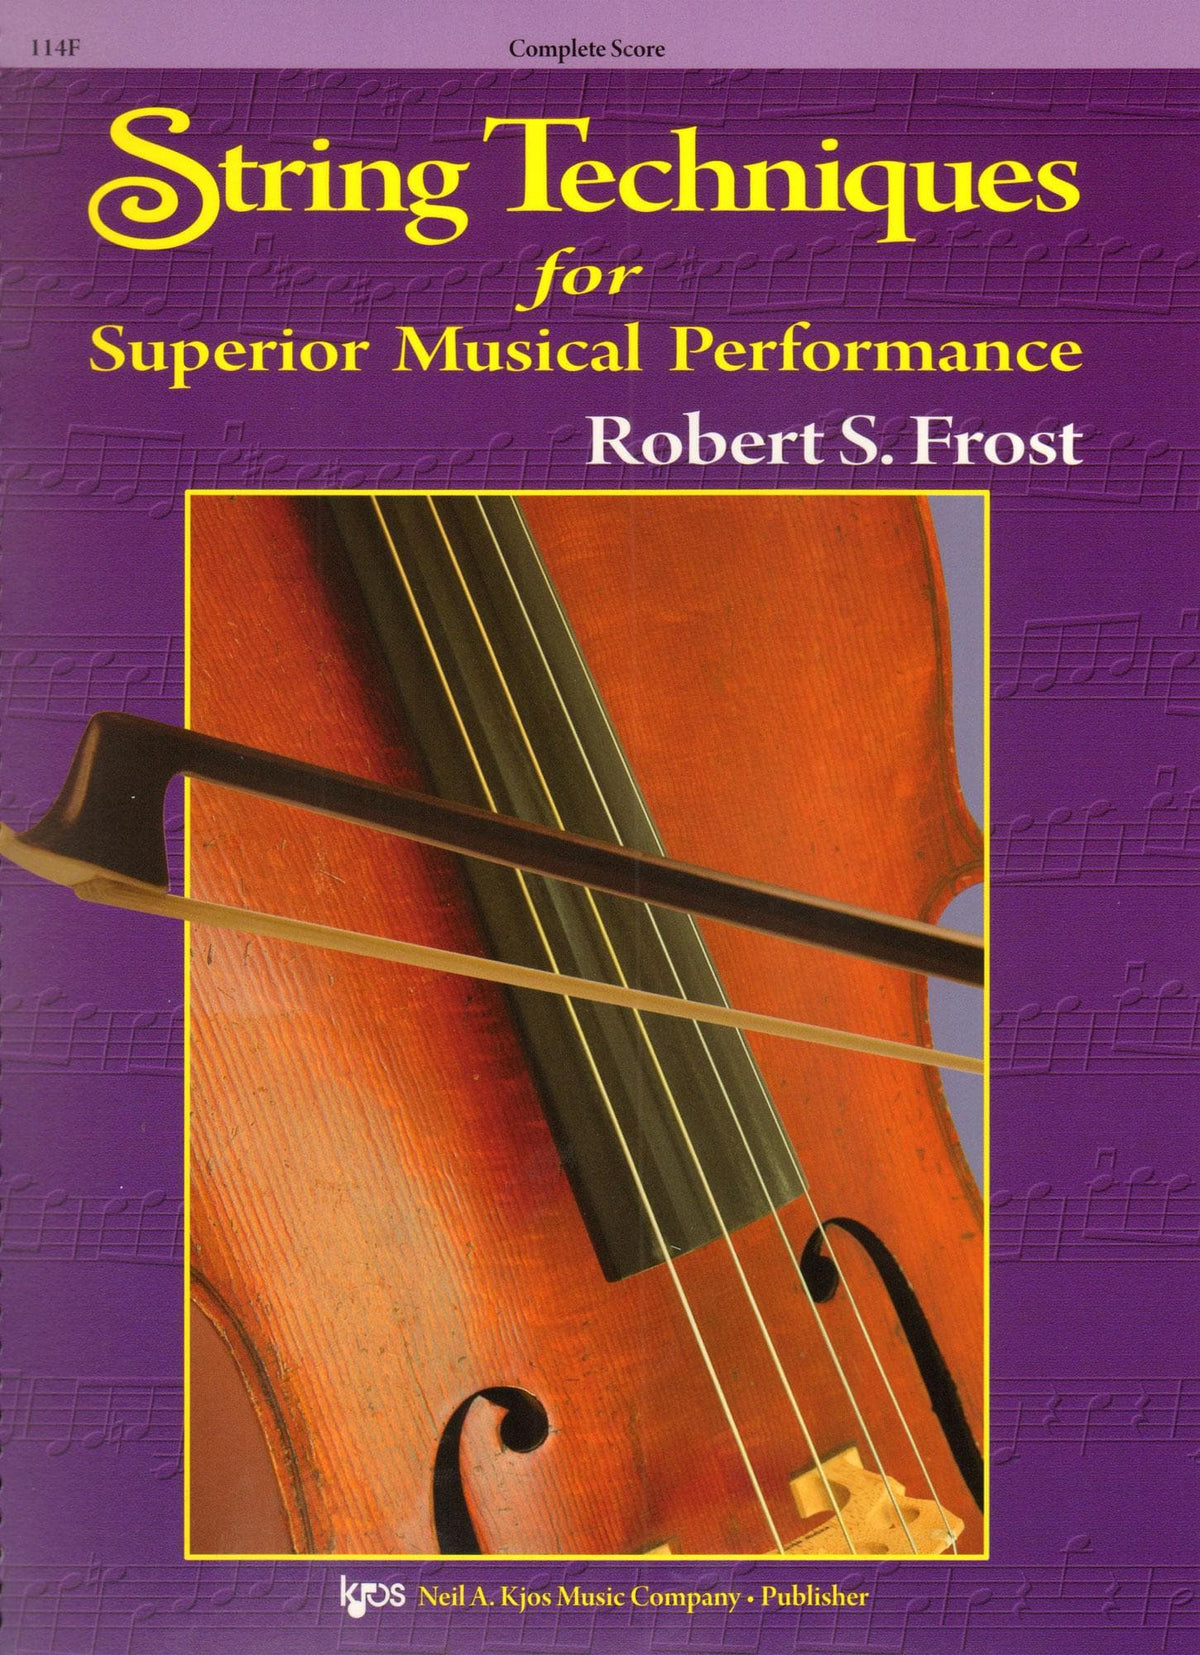 Frost, Robert - String Techniques for Superior Music Performance - Score - Kjos Music Co